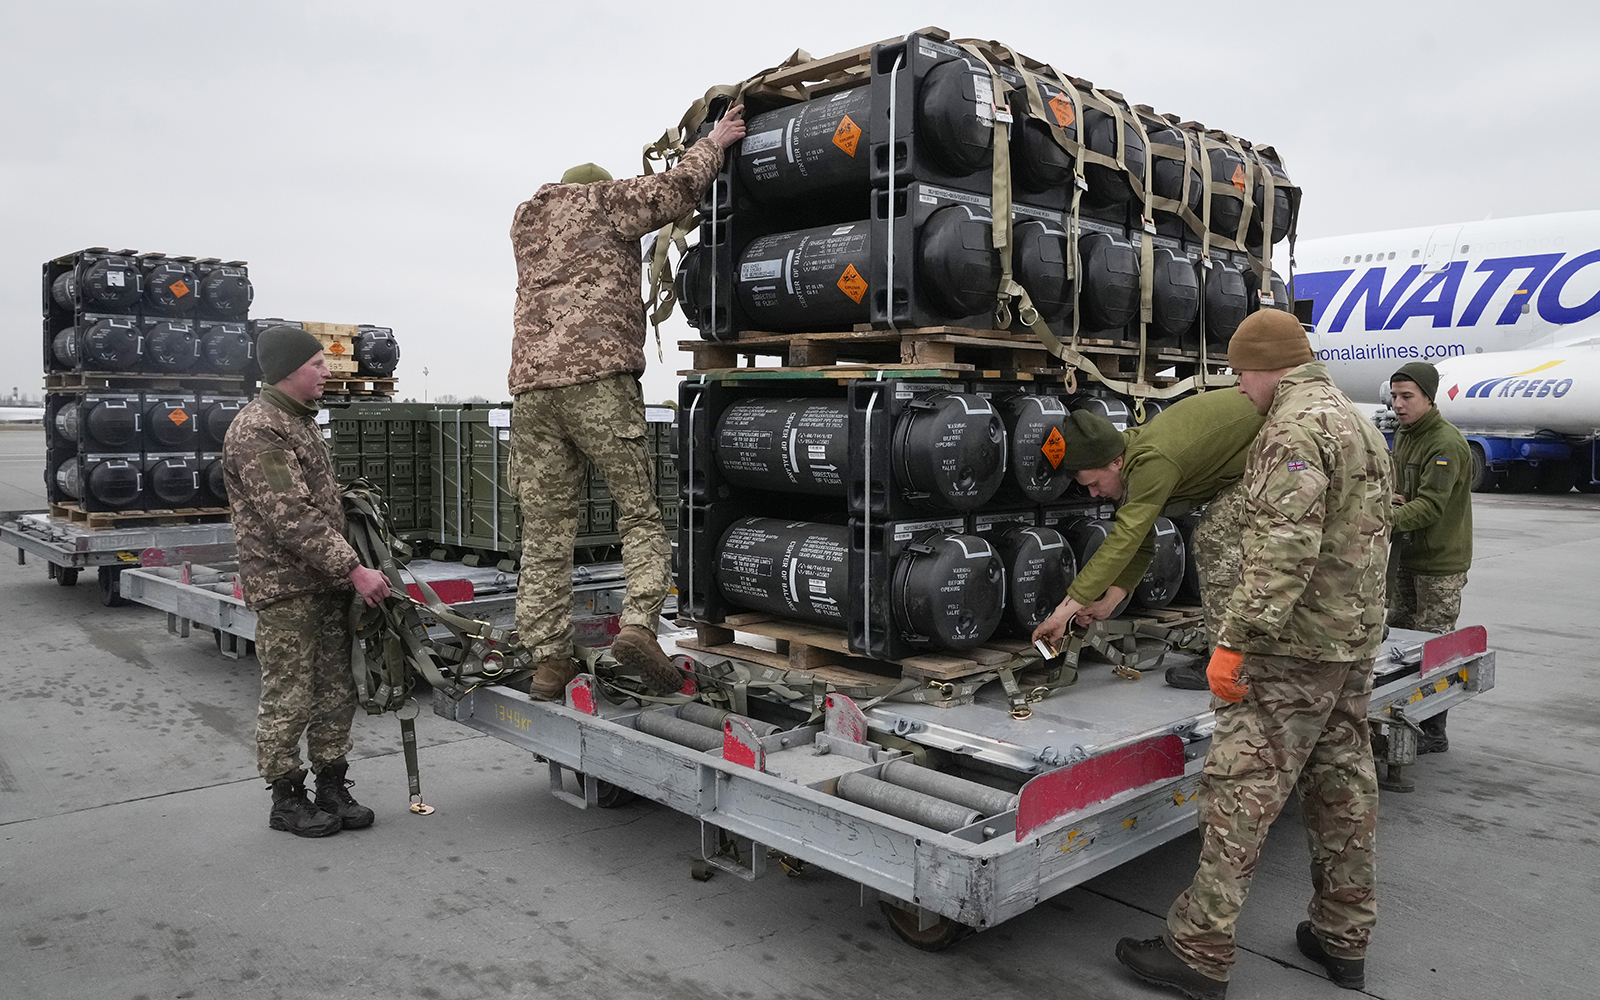 Ukrainian servicemen unpack Javelin anti-tank missiles, delivered as part of the US security assistance to Ukraine, at the Boryspil airport, Kyiv, Ukraine, on February 11.